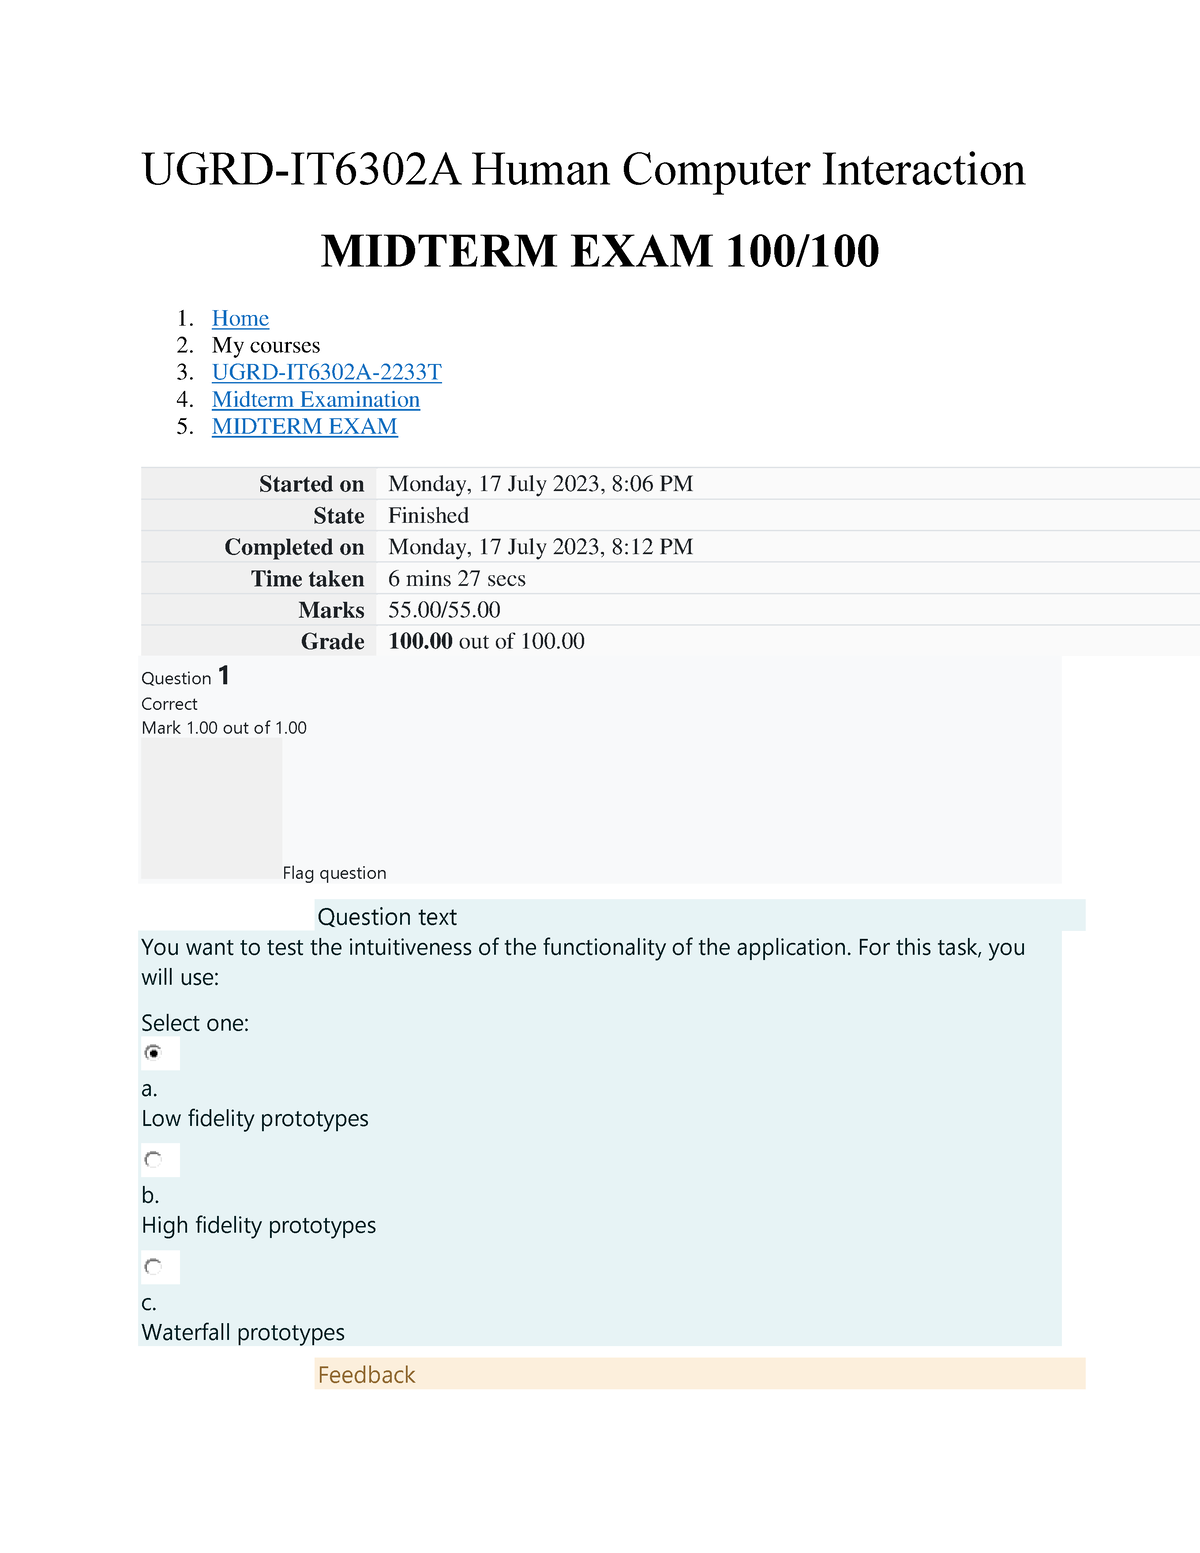 NSTP6101 Final Exam Attempt review - Home / My courses / UGRD